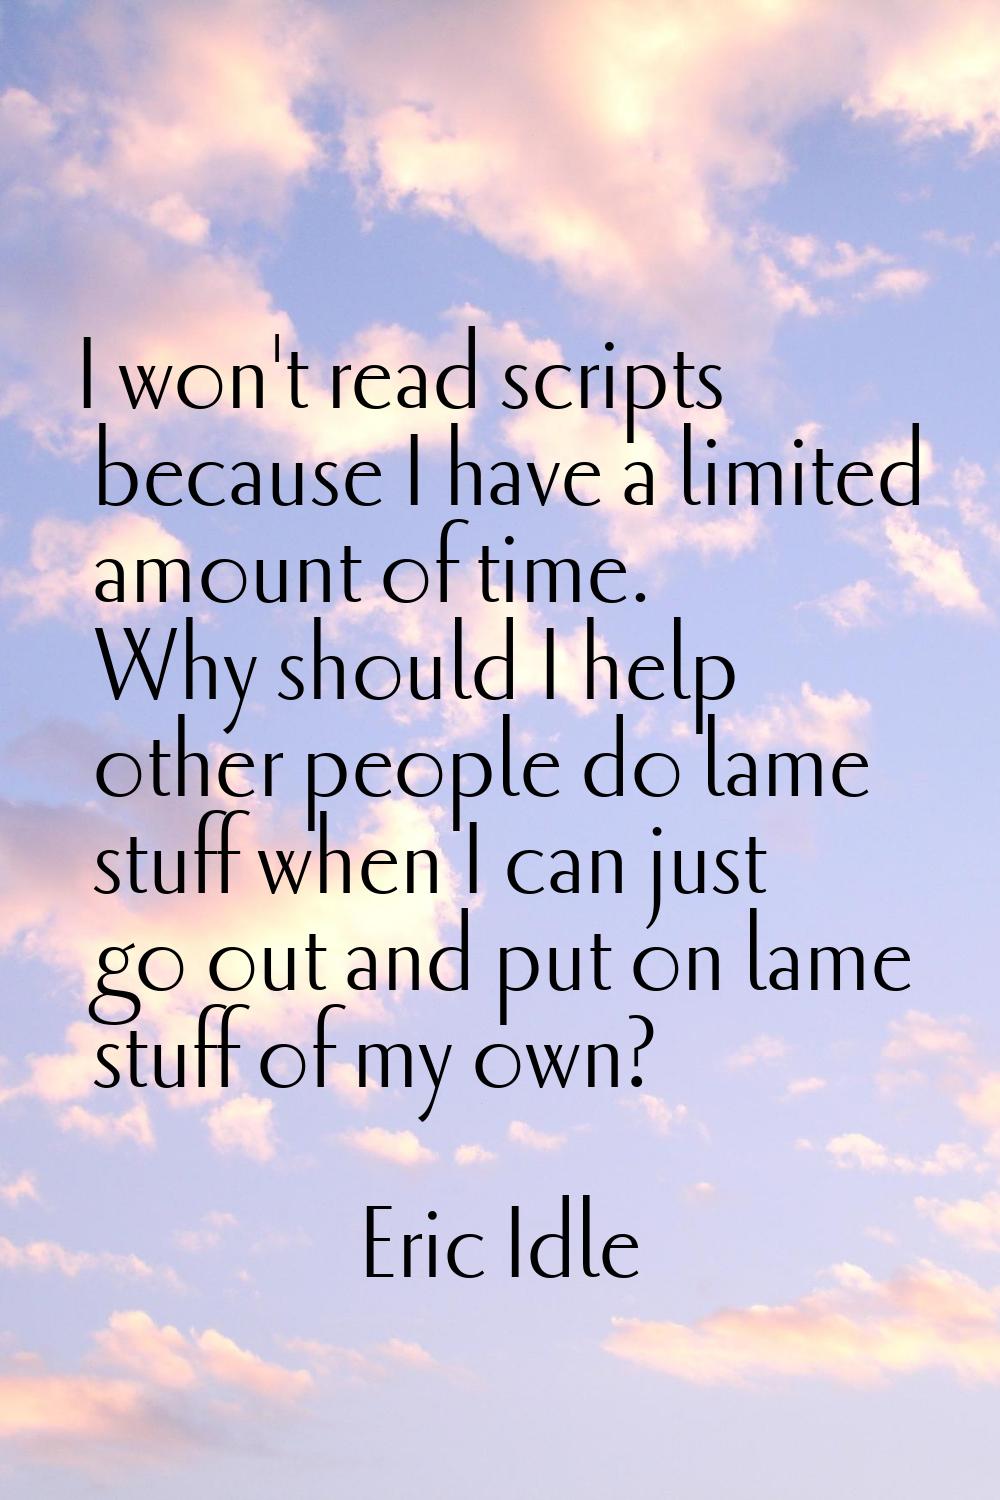 I won't read scripts because I have a limited amount of time. Why should I help other people do lam